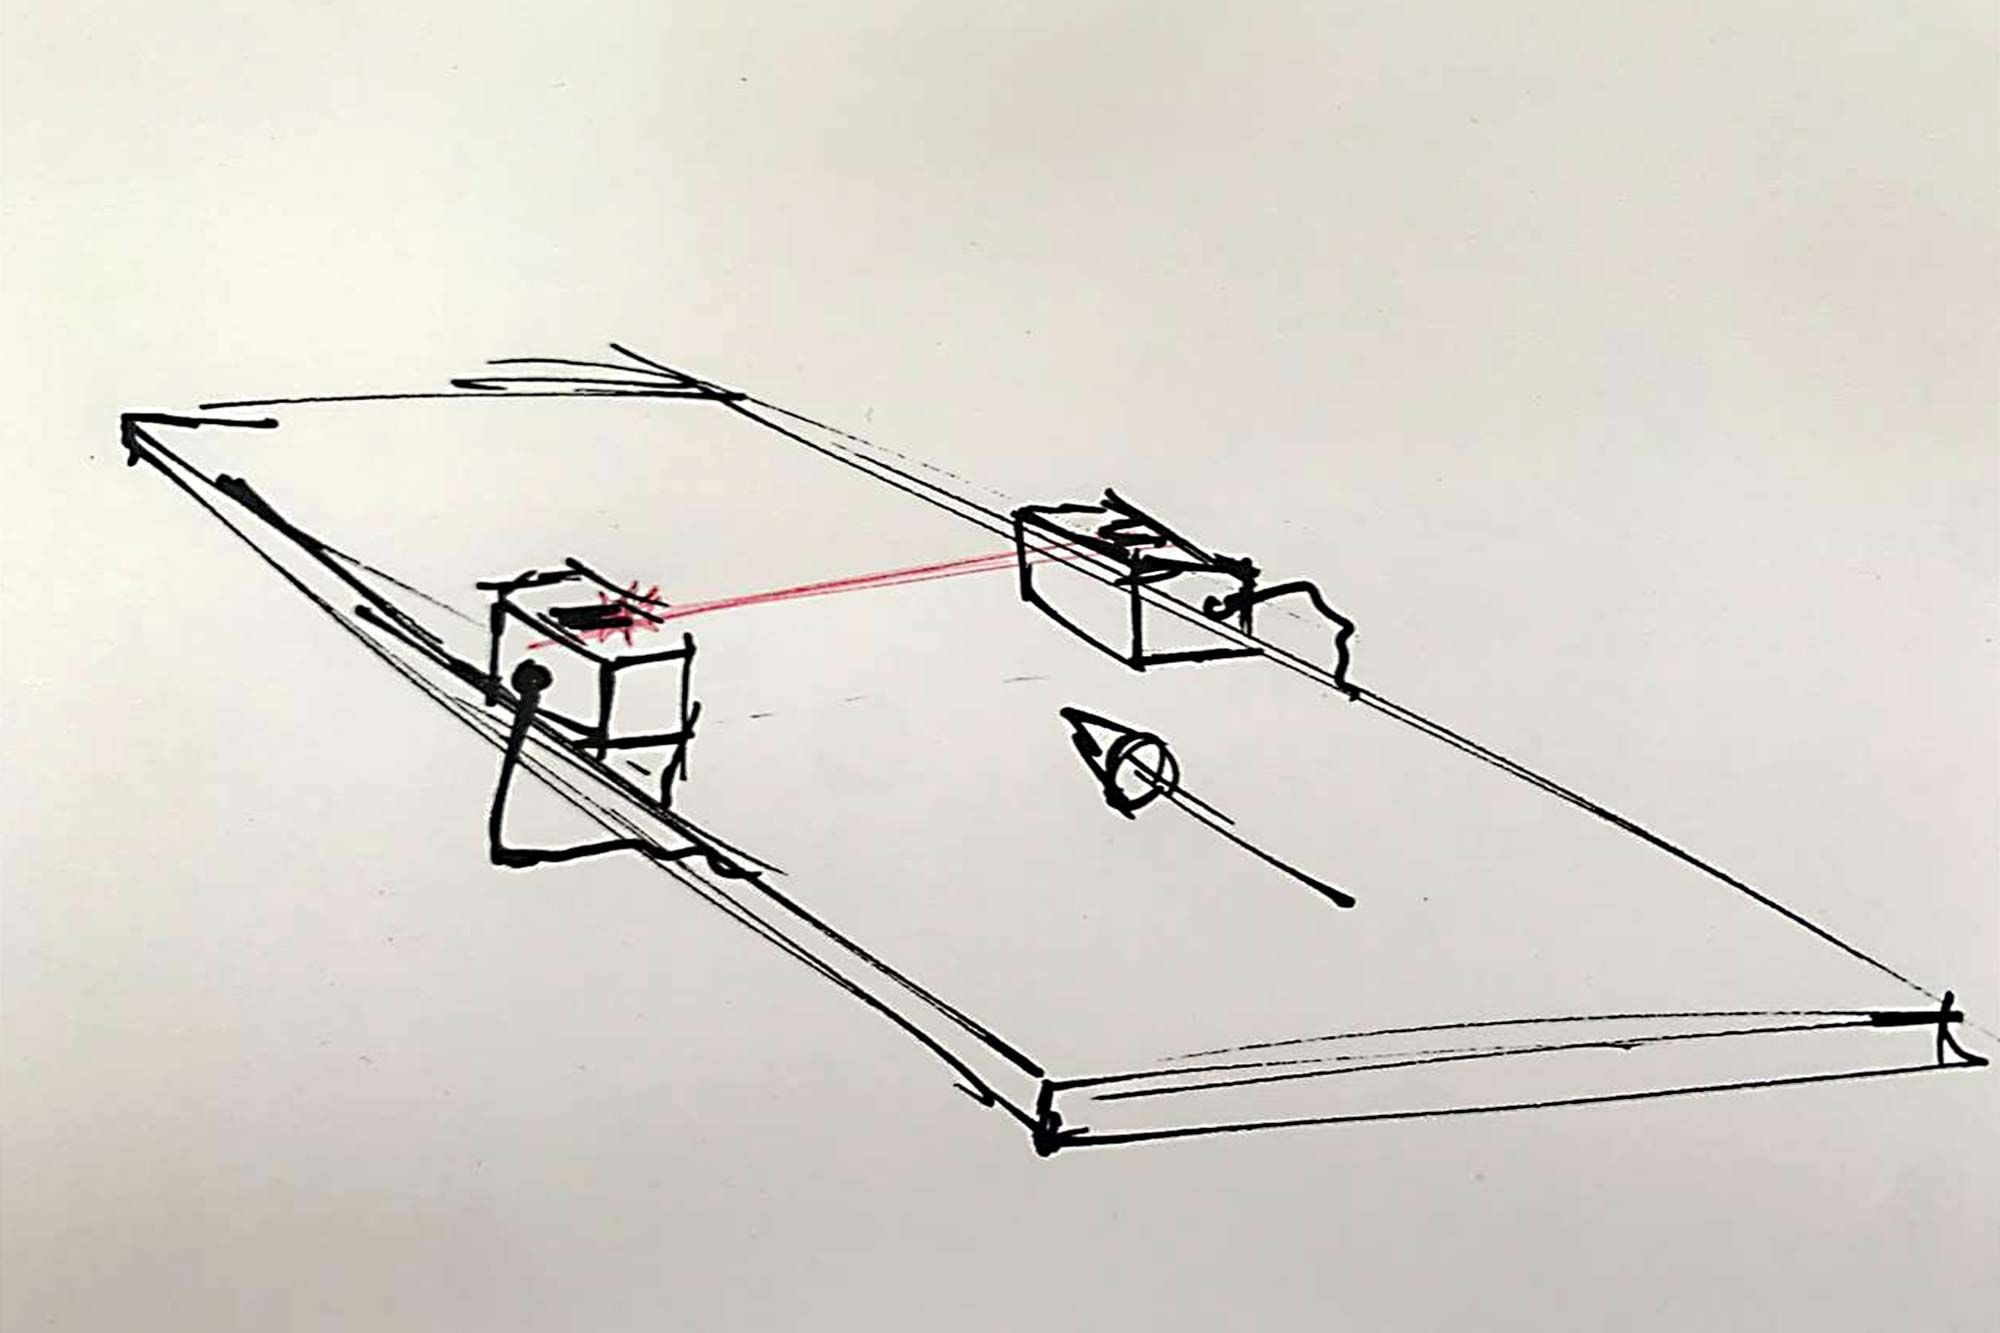 initial sketch of the light barrier